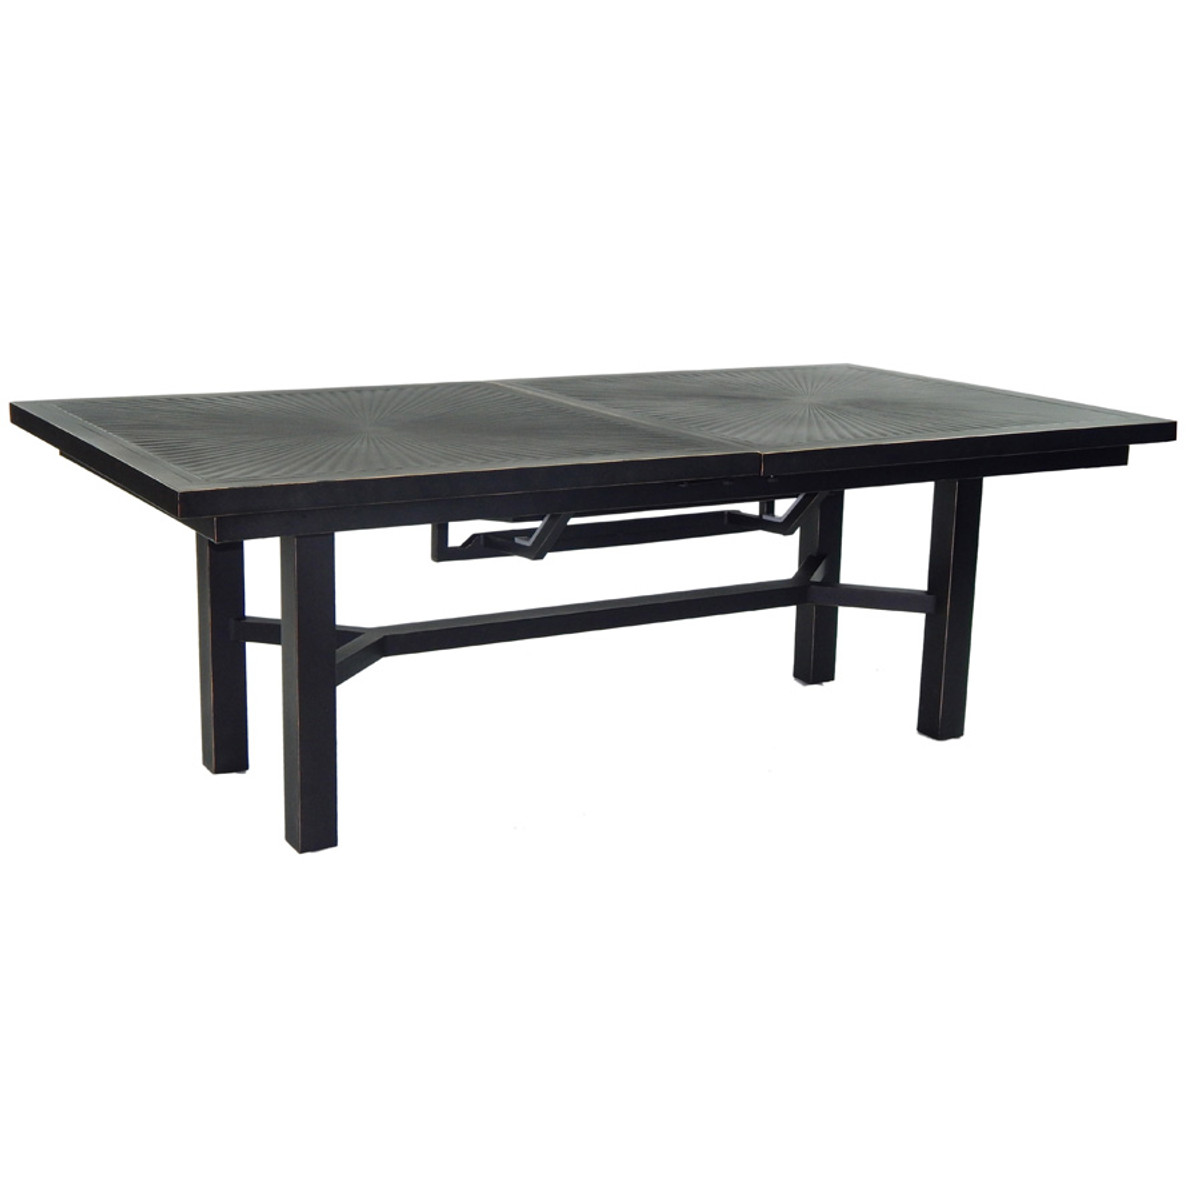 86″ CLASSICAL RECTANGULAR EXTENSION DINING TABLE